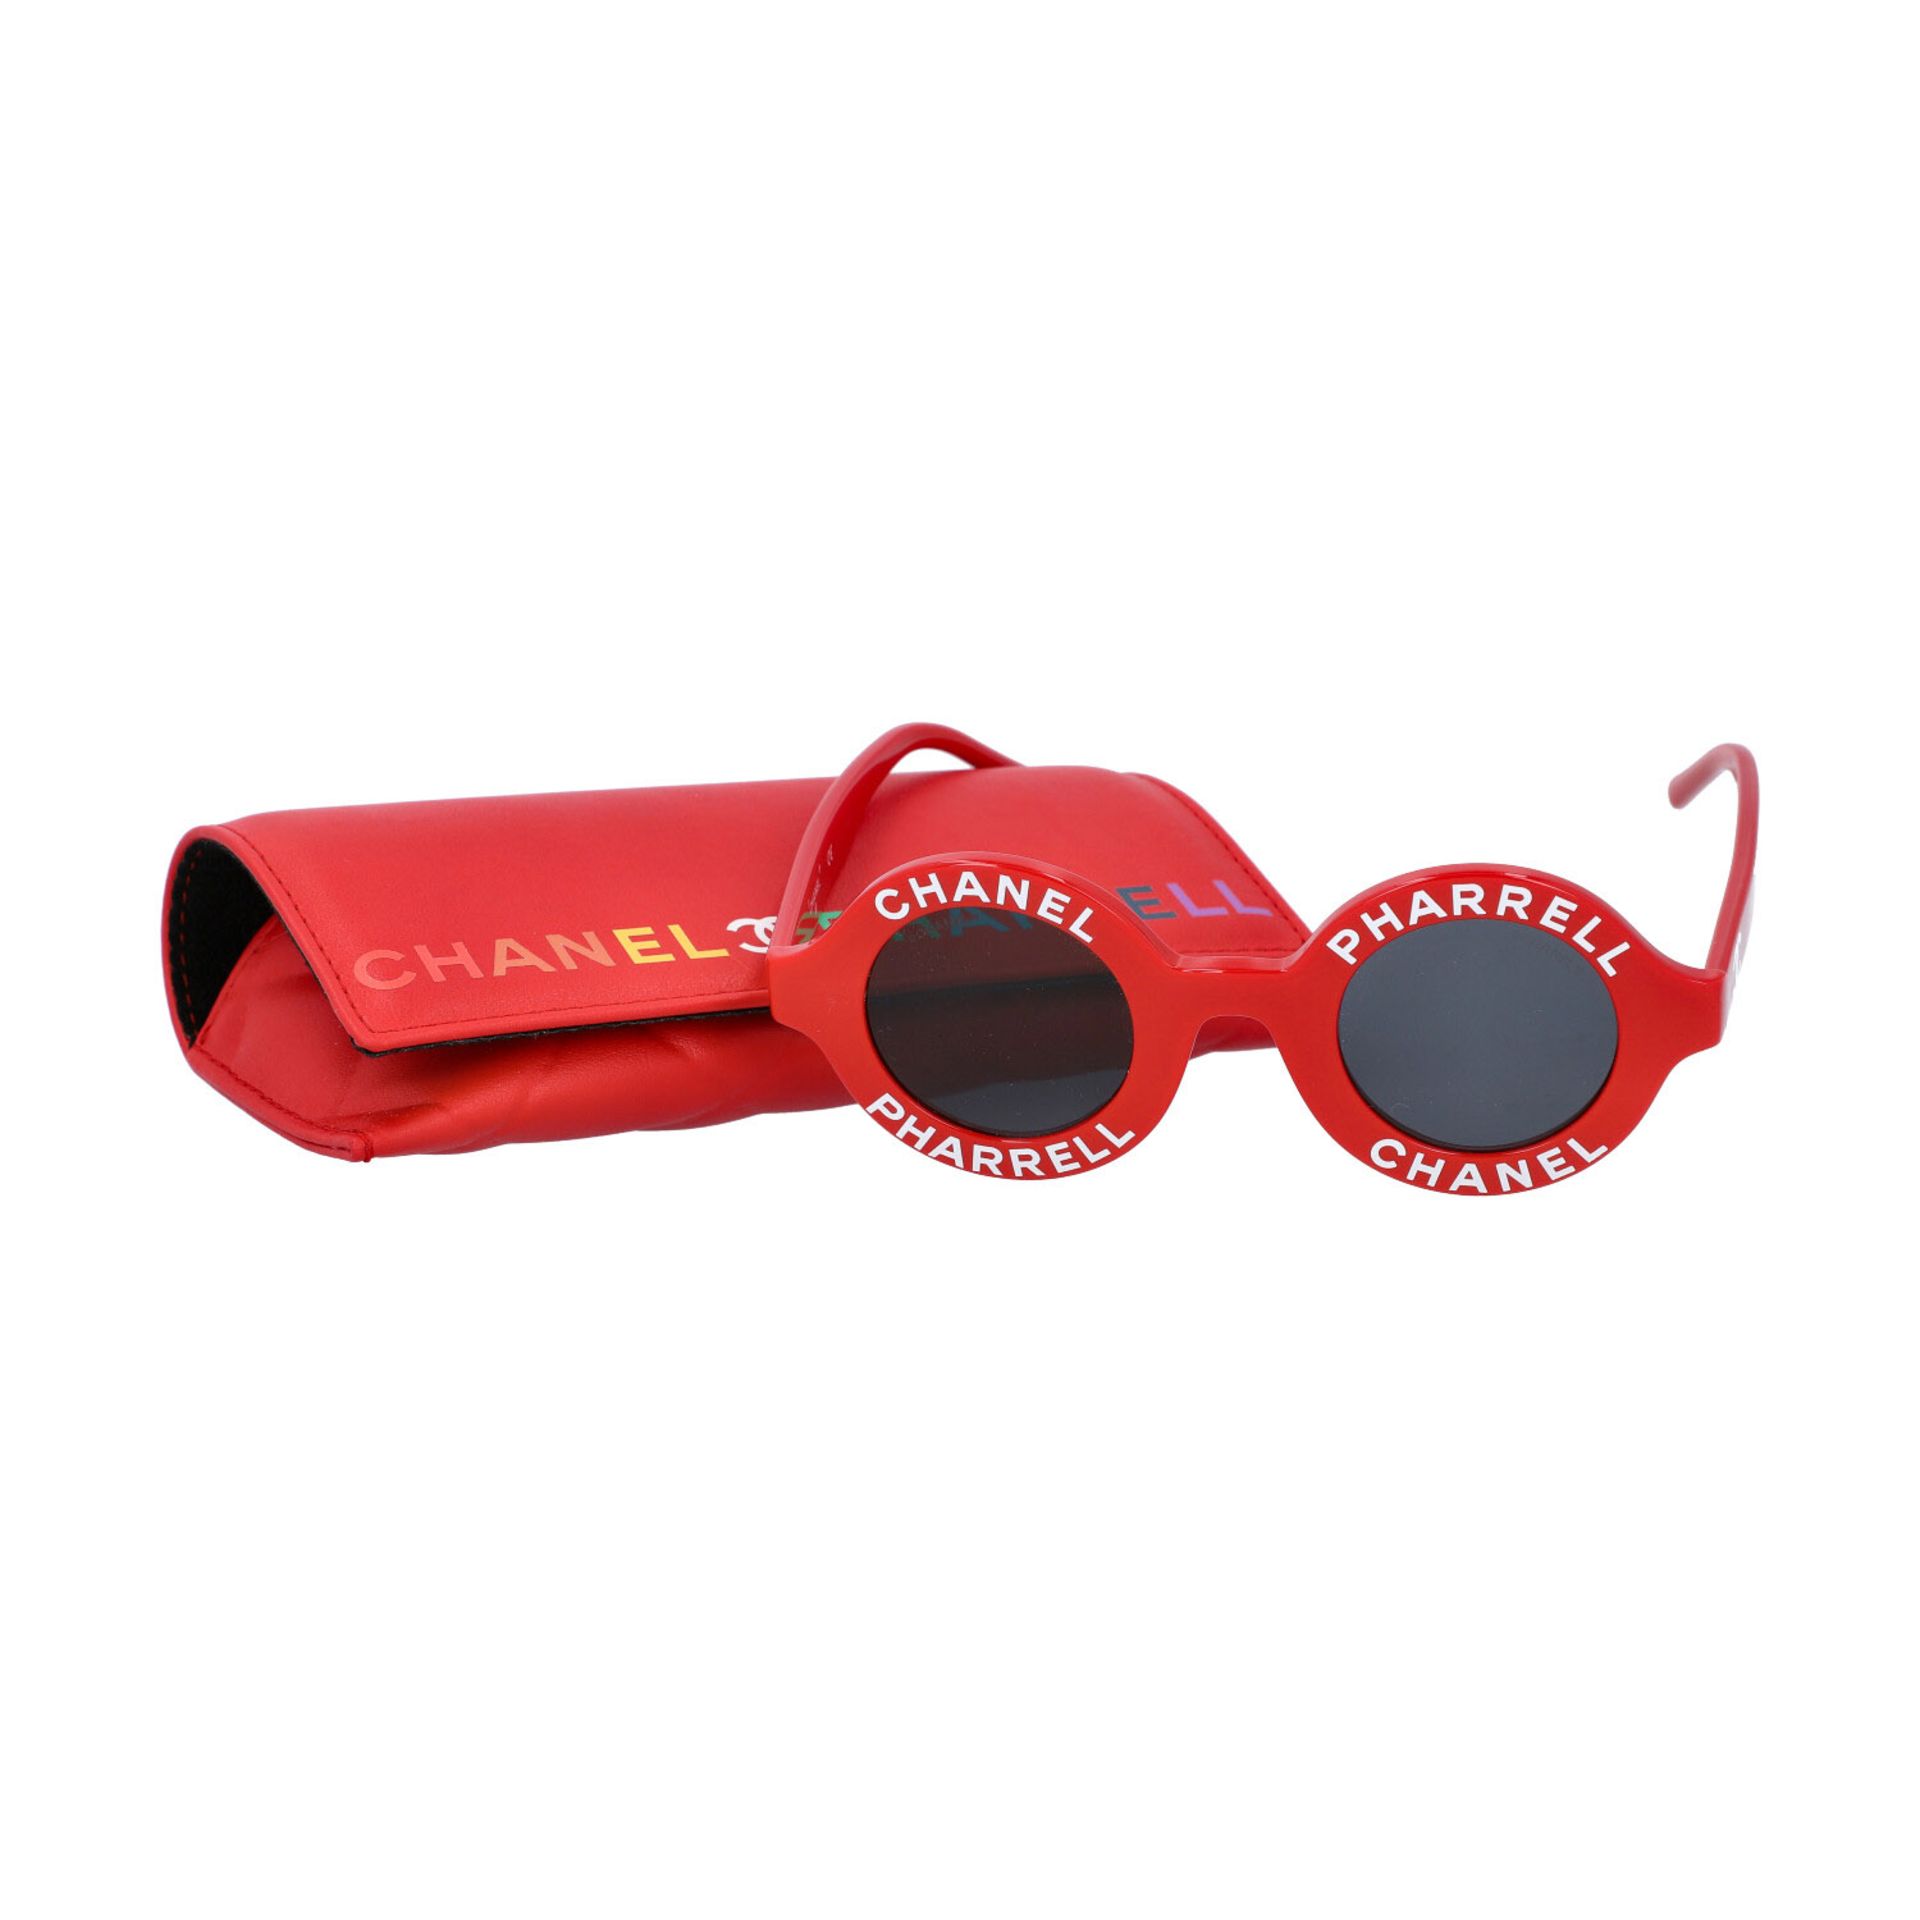 CHANEL x PHARRELL CAPSULE COLLECTION Sonnenbrille. - Image 5 of 5